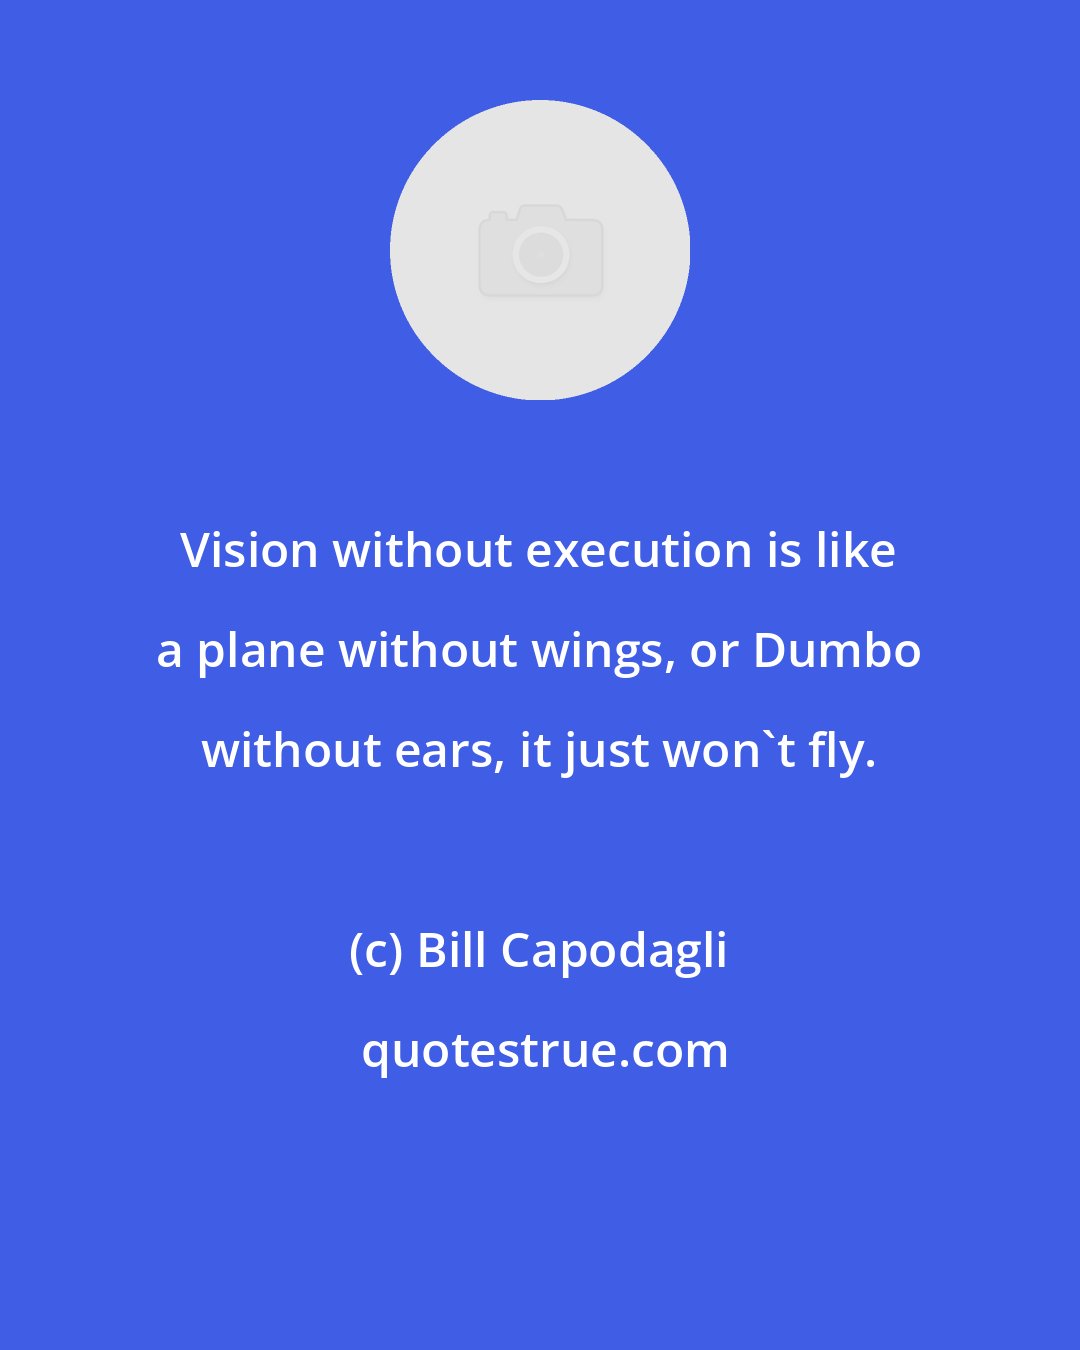 Bill Capodagli: Vision without execution is like a plane without wings, or Dumbo without ears, it just won't fly.